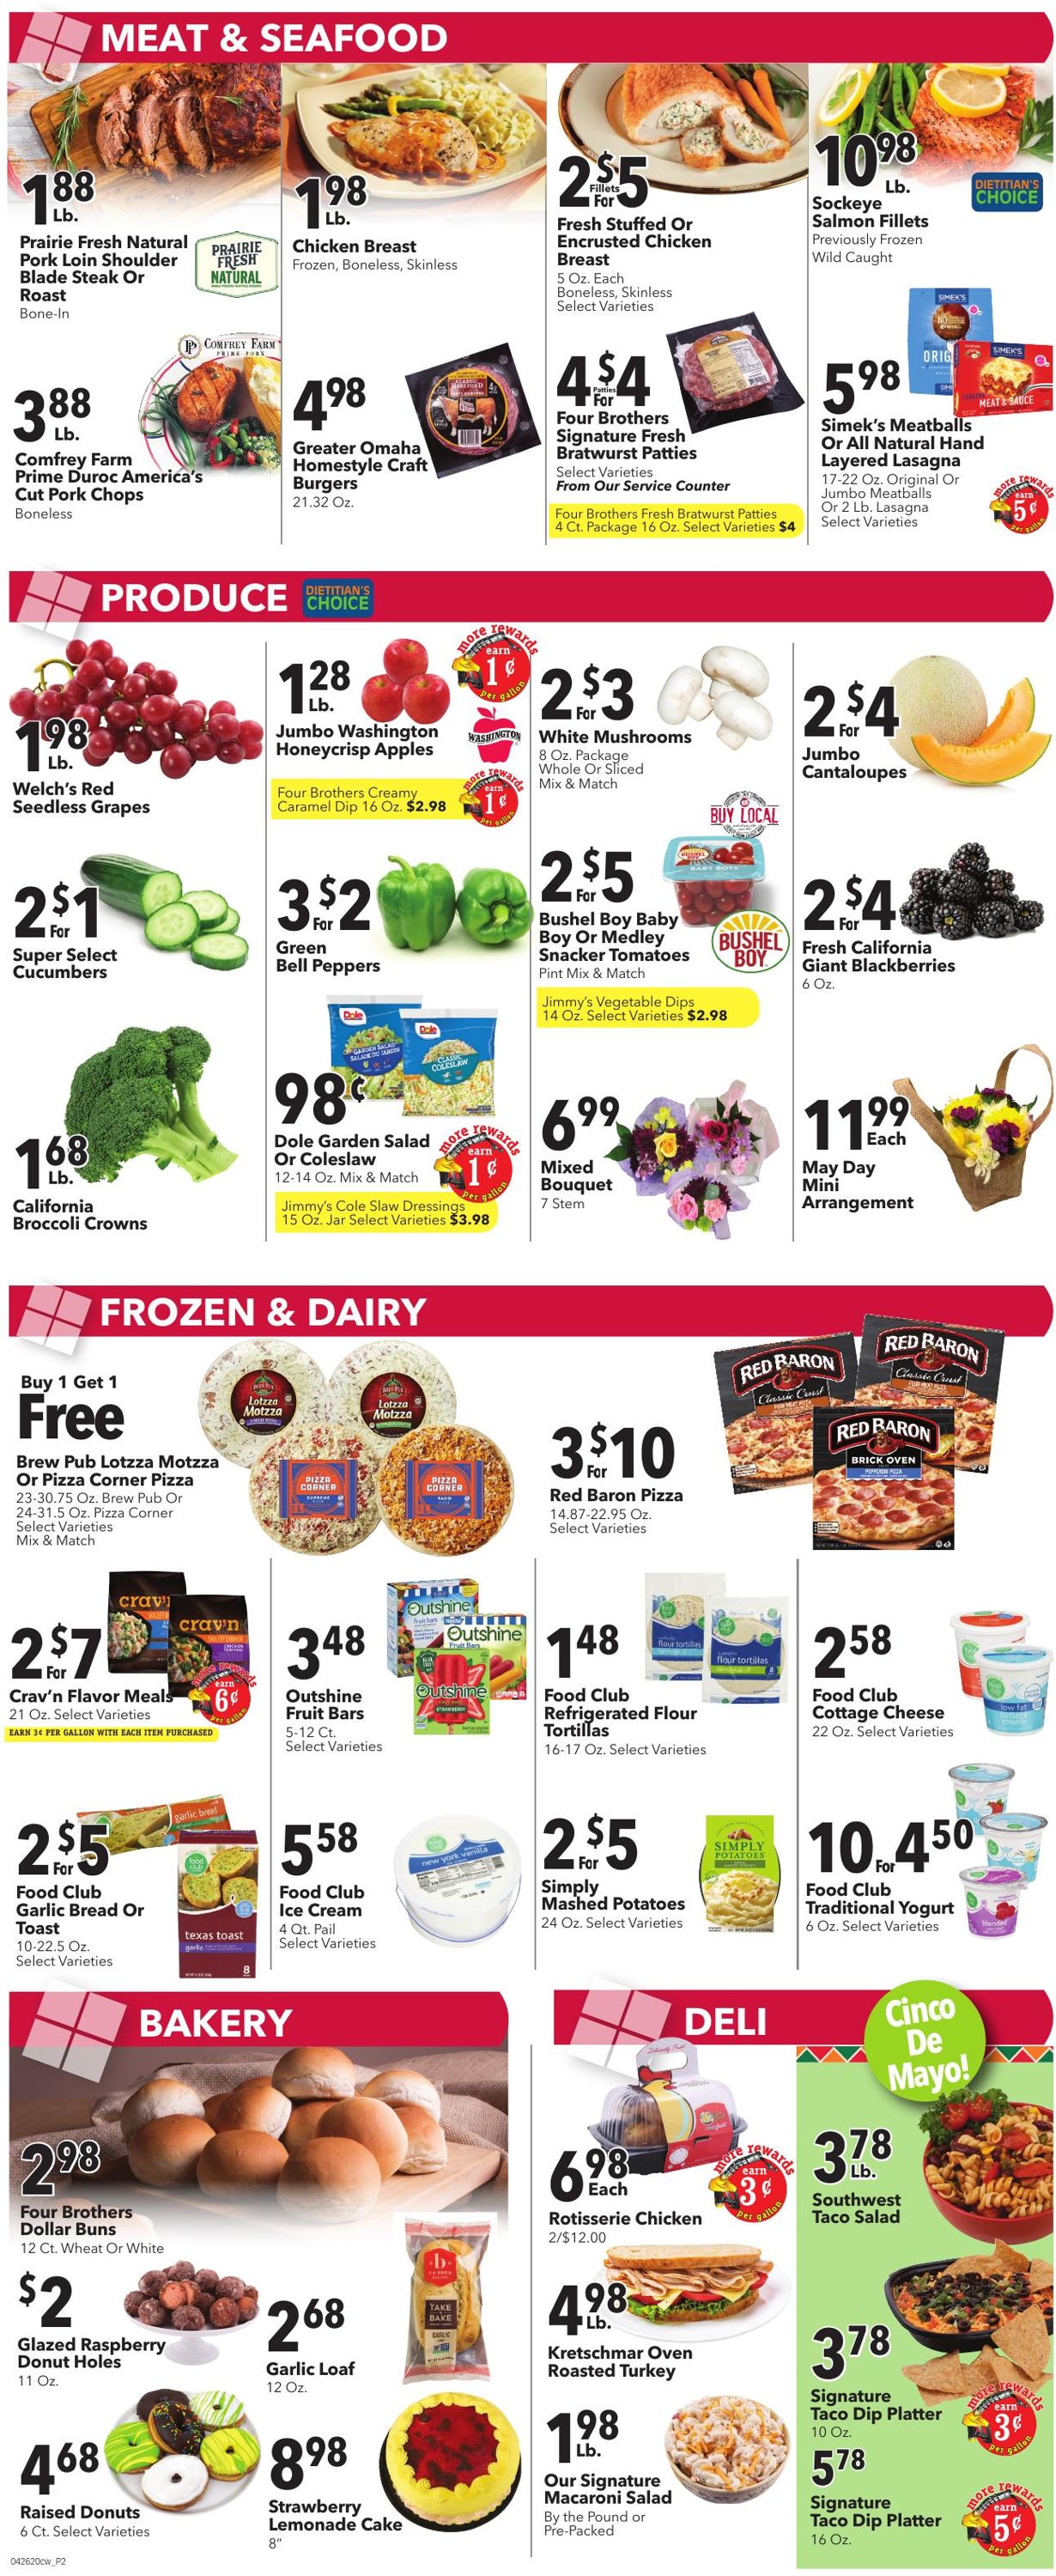 Cash Wise Weekly Ad Circular - valid 04/29-05/05/2020 (Page 2)